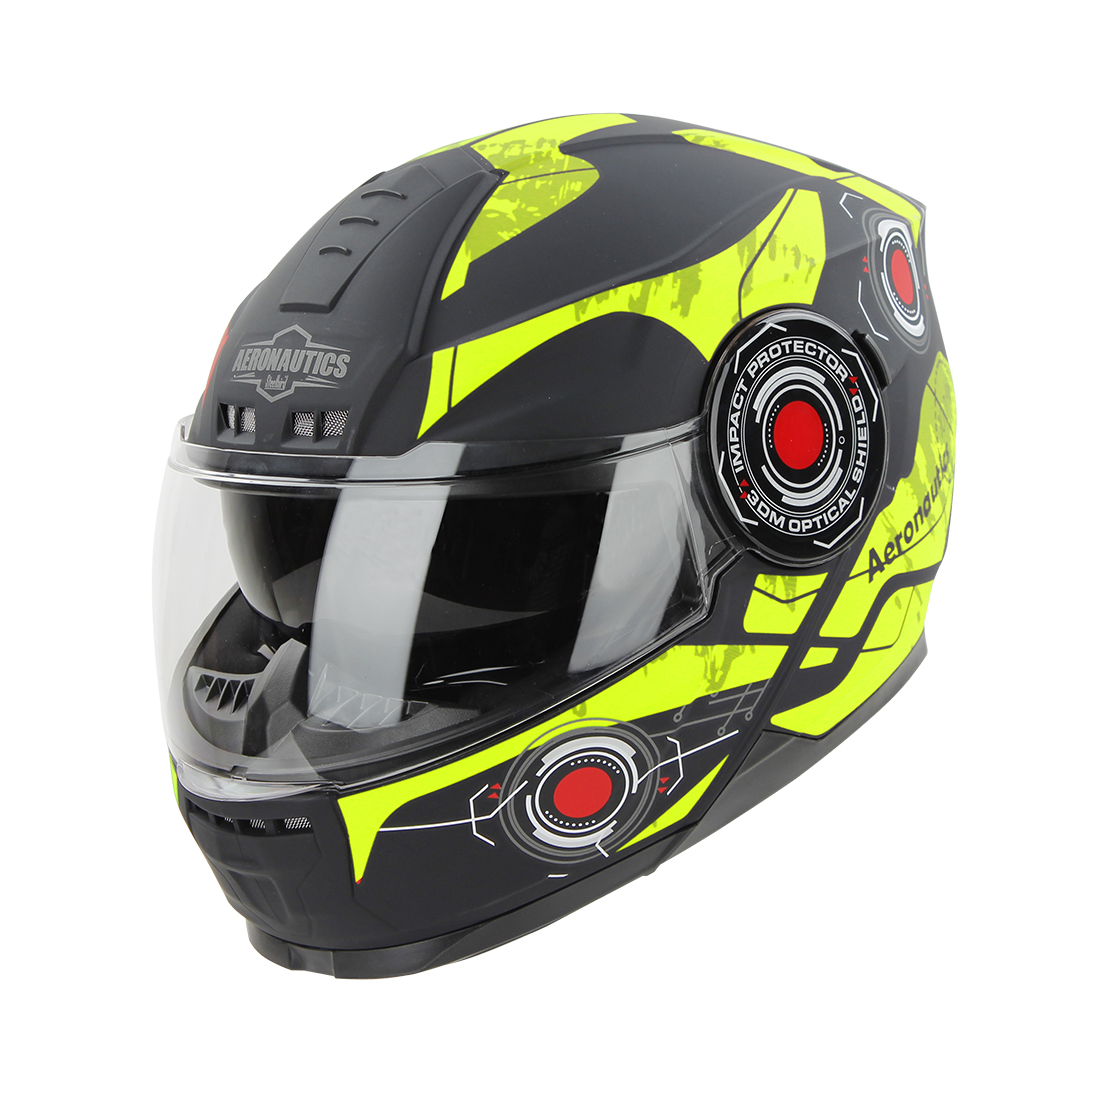 Steelbird SBH-40 Cyber ISI Certified Full Face Graphic Helmet For Men And Women With Inner Sun Shield (Glossy Black Neon)